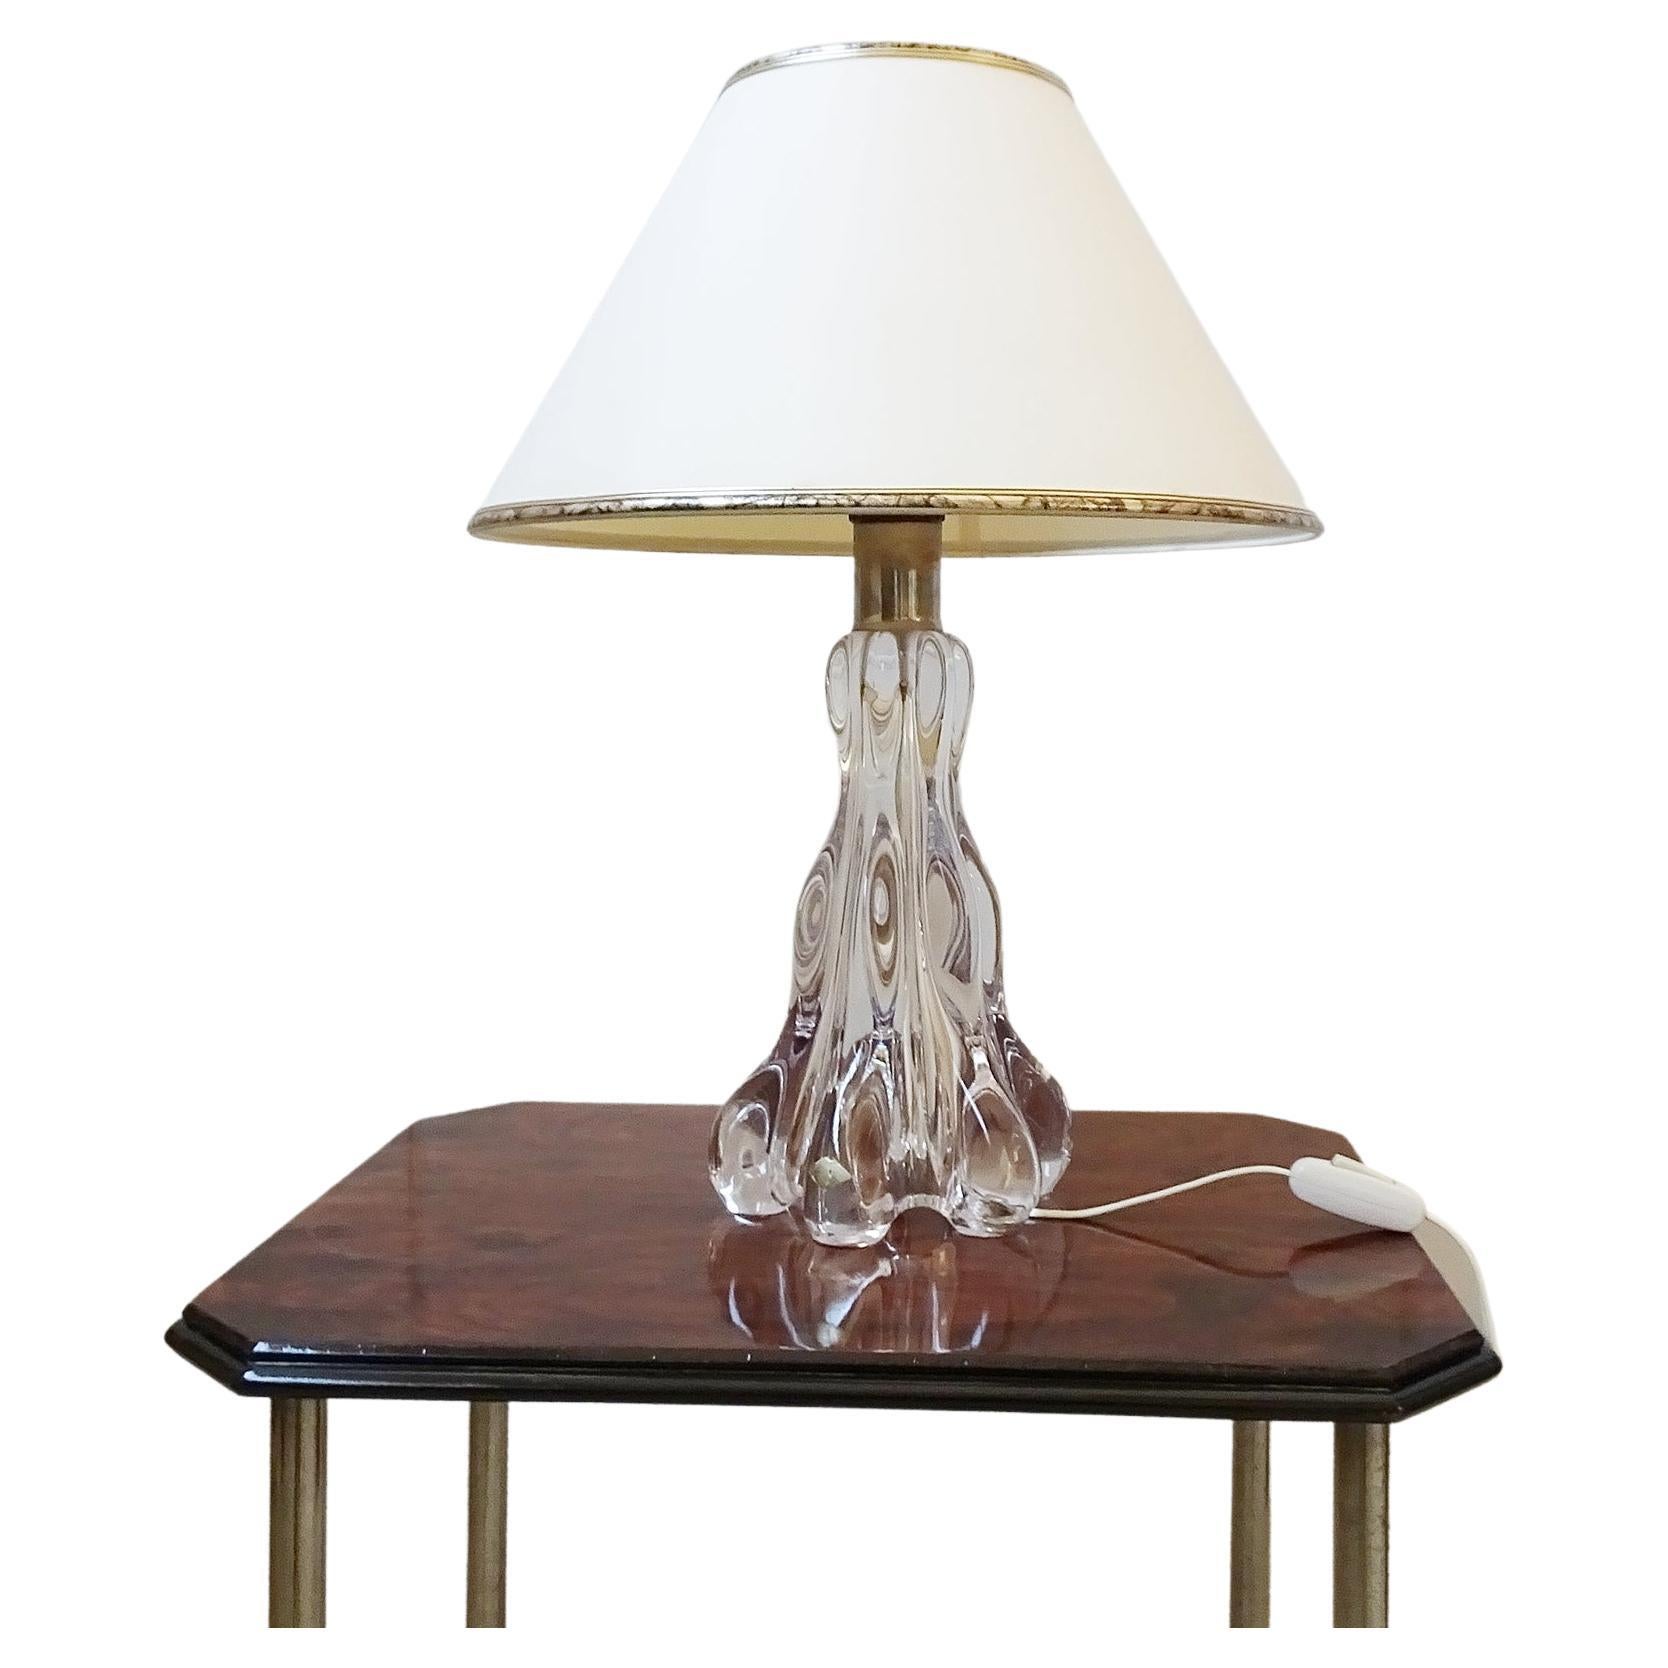 French table lamp by Glashütte Vannes le Chatel. The sculpturally shaped base made of crystal glass has six protruding wavy edges and gives a brutalistic but noble look. Finished off with a cream colored lampshade with a gold colored abstract